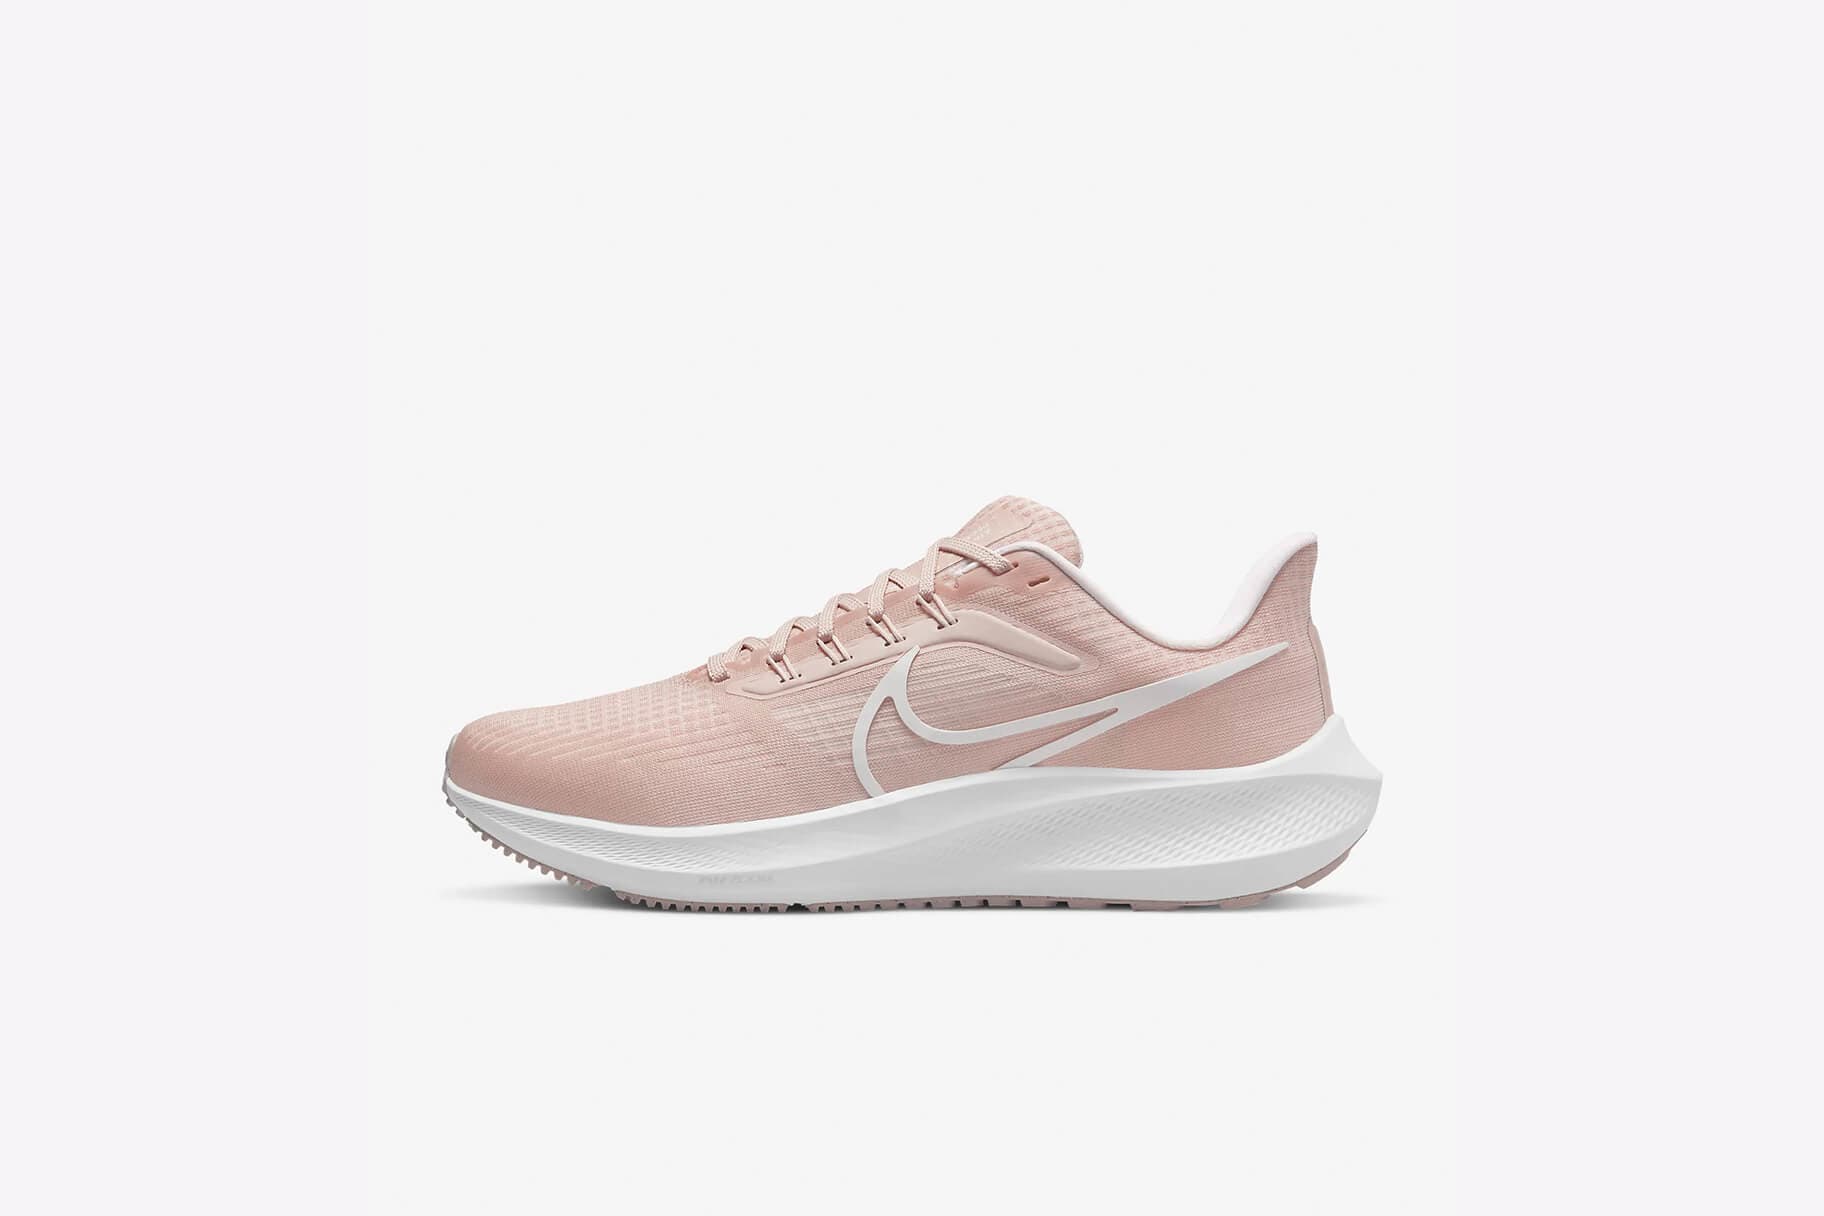 Syndicate Hykler Fugtighed The Best Pink Nike Shoes to Shop Now. Nike.com